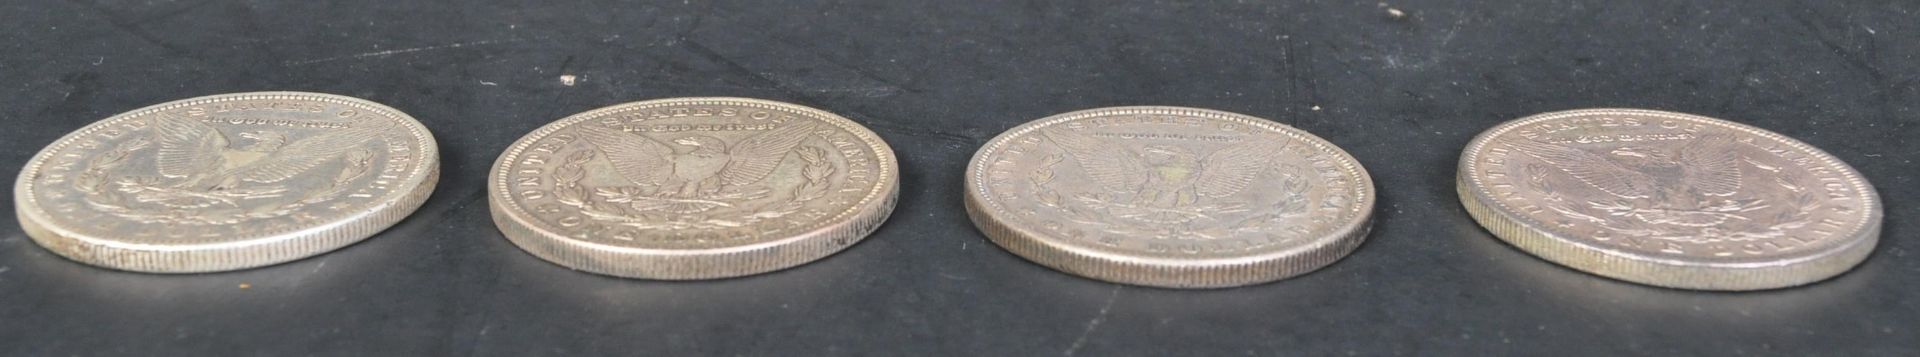 FOUR 19TH & 20TH CENTURY USA SILVER MORGAN DOLLARS - Image 3 of 3